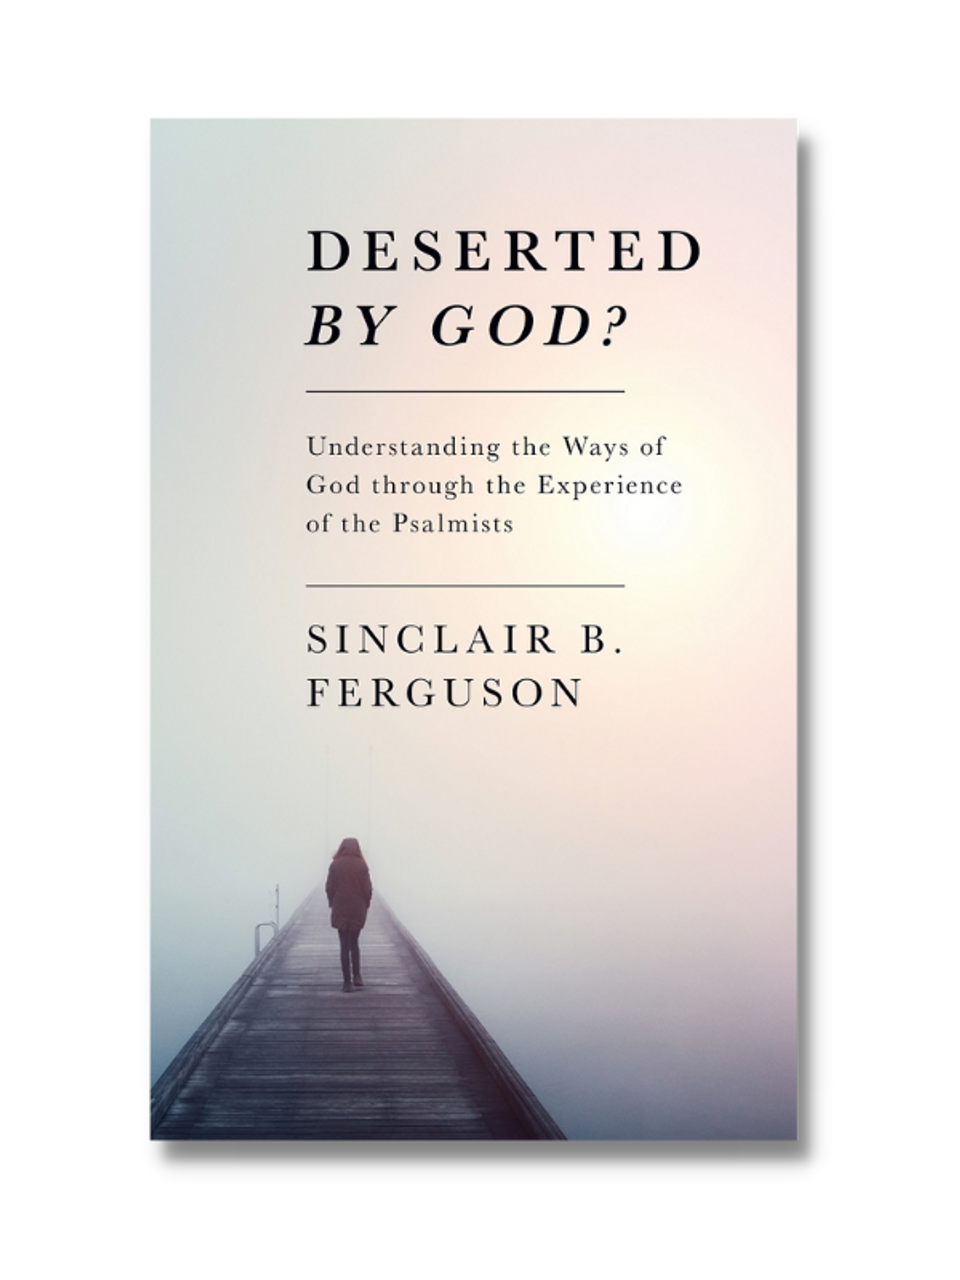 Deserted by God: Understanding the Ways of God Through the Experience of the Psalmists (Paperback)